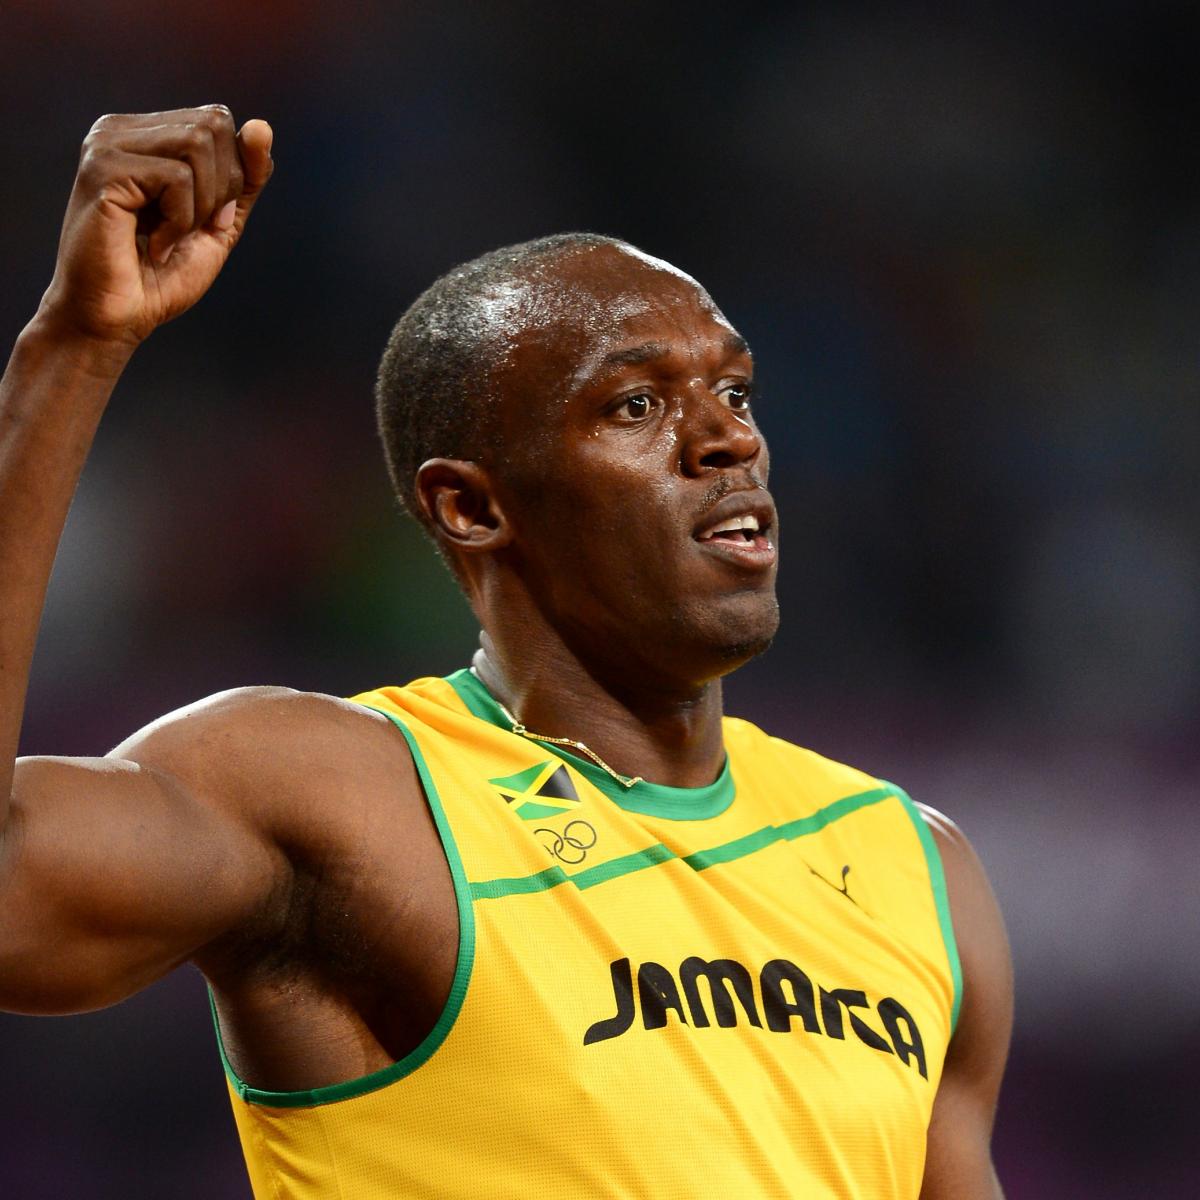 Usain Bolt 100m: Victory Shows That He Is the Greatest Sprinter of All